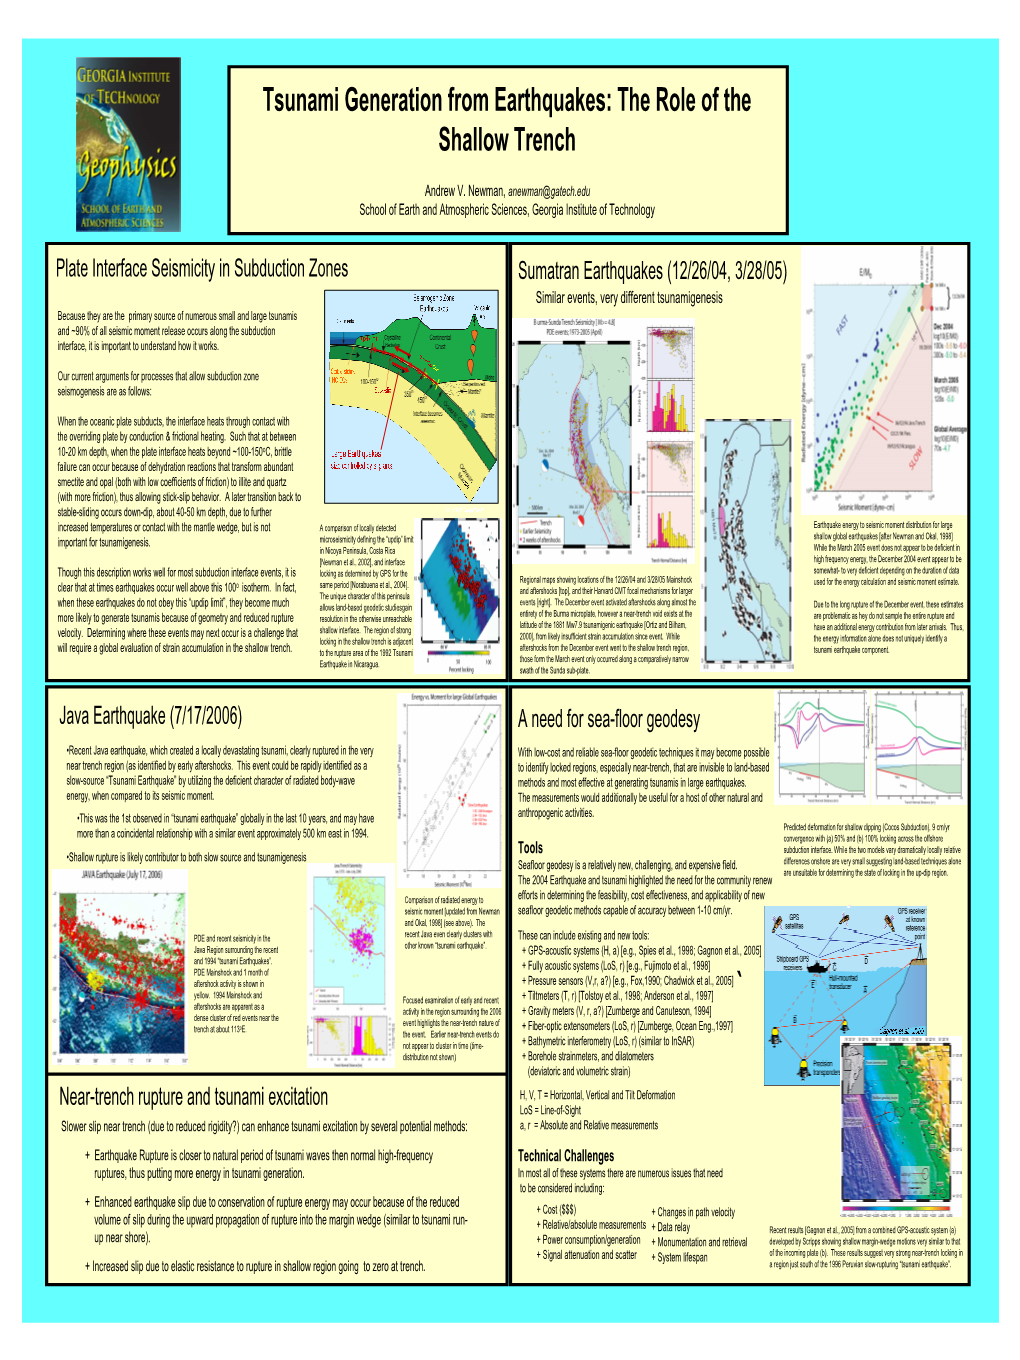 Tsunami Generation from Earthquakes: the Role of the Shallow Trench